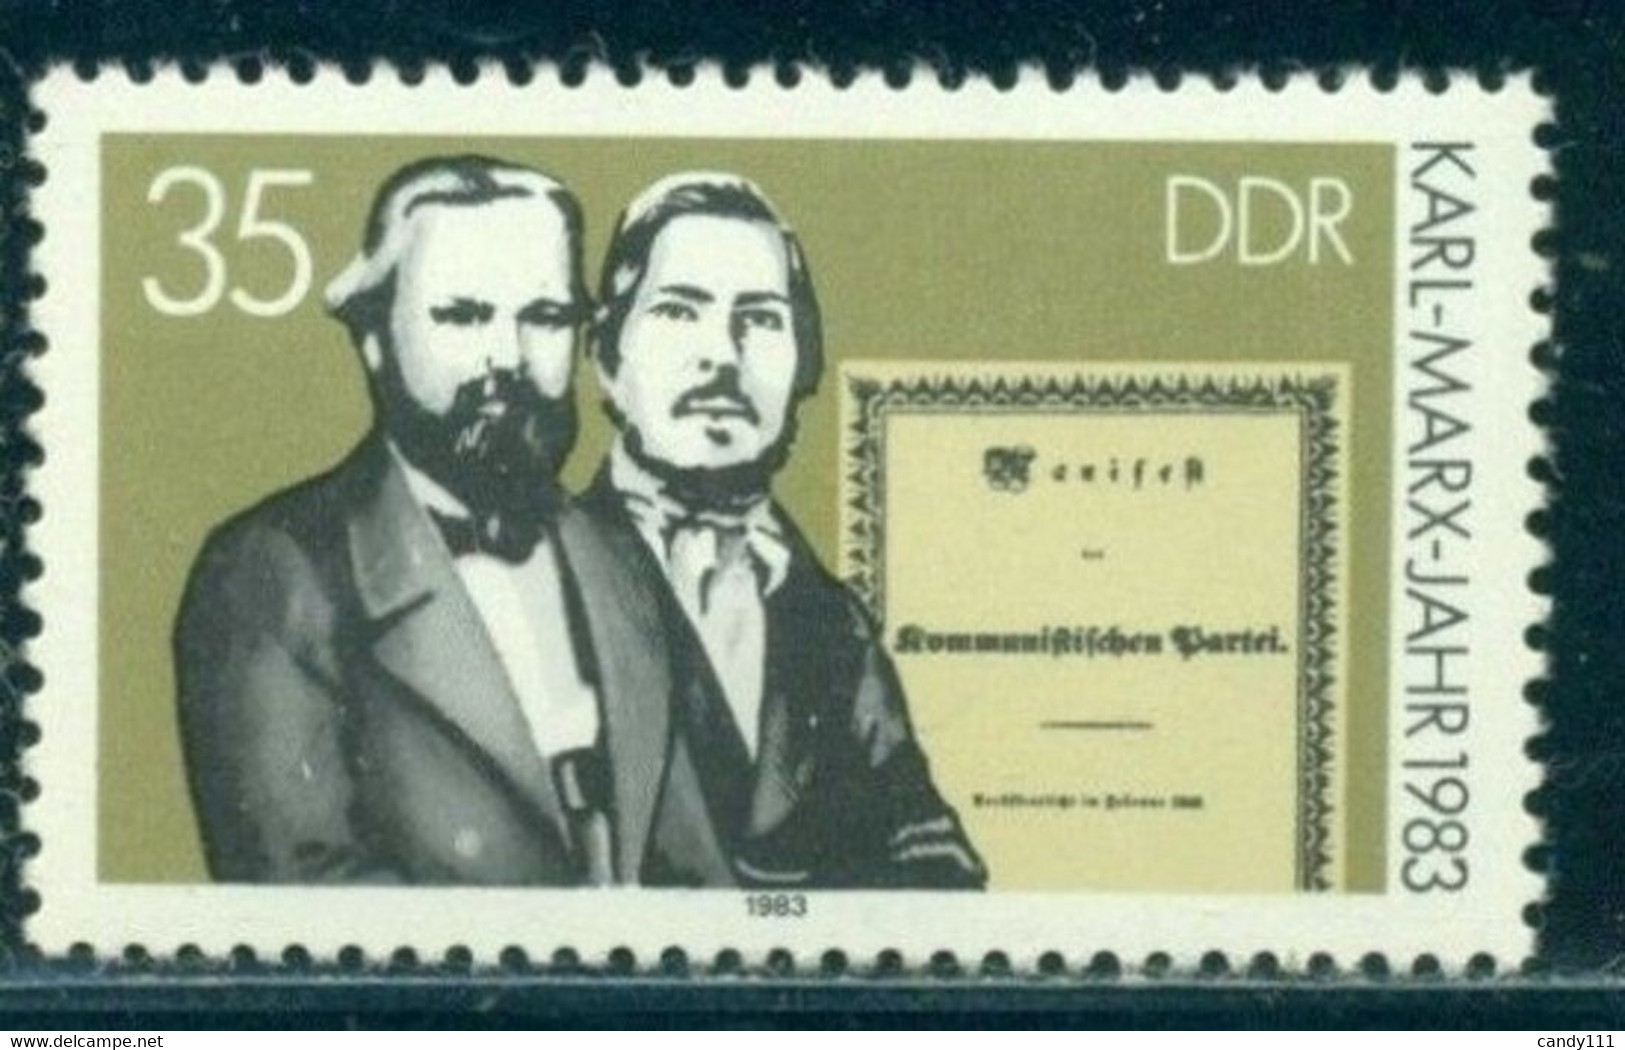 1983 Karl Marx And F. Engels, Title Page "Manifesto Of The Communist Party", DDR, Mi. 2785, MNH - Karl Marx